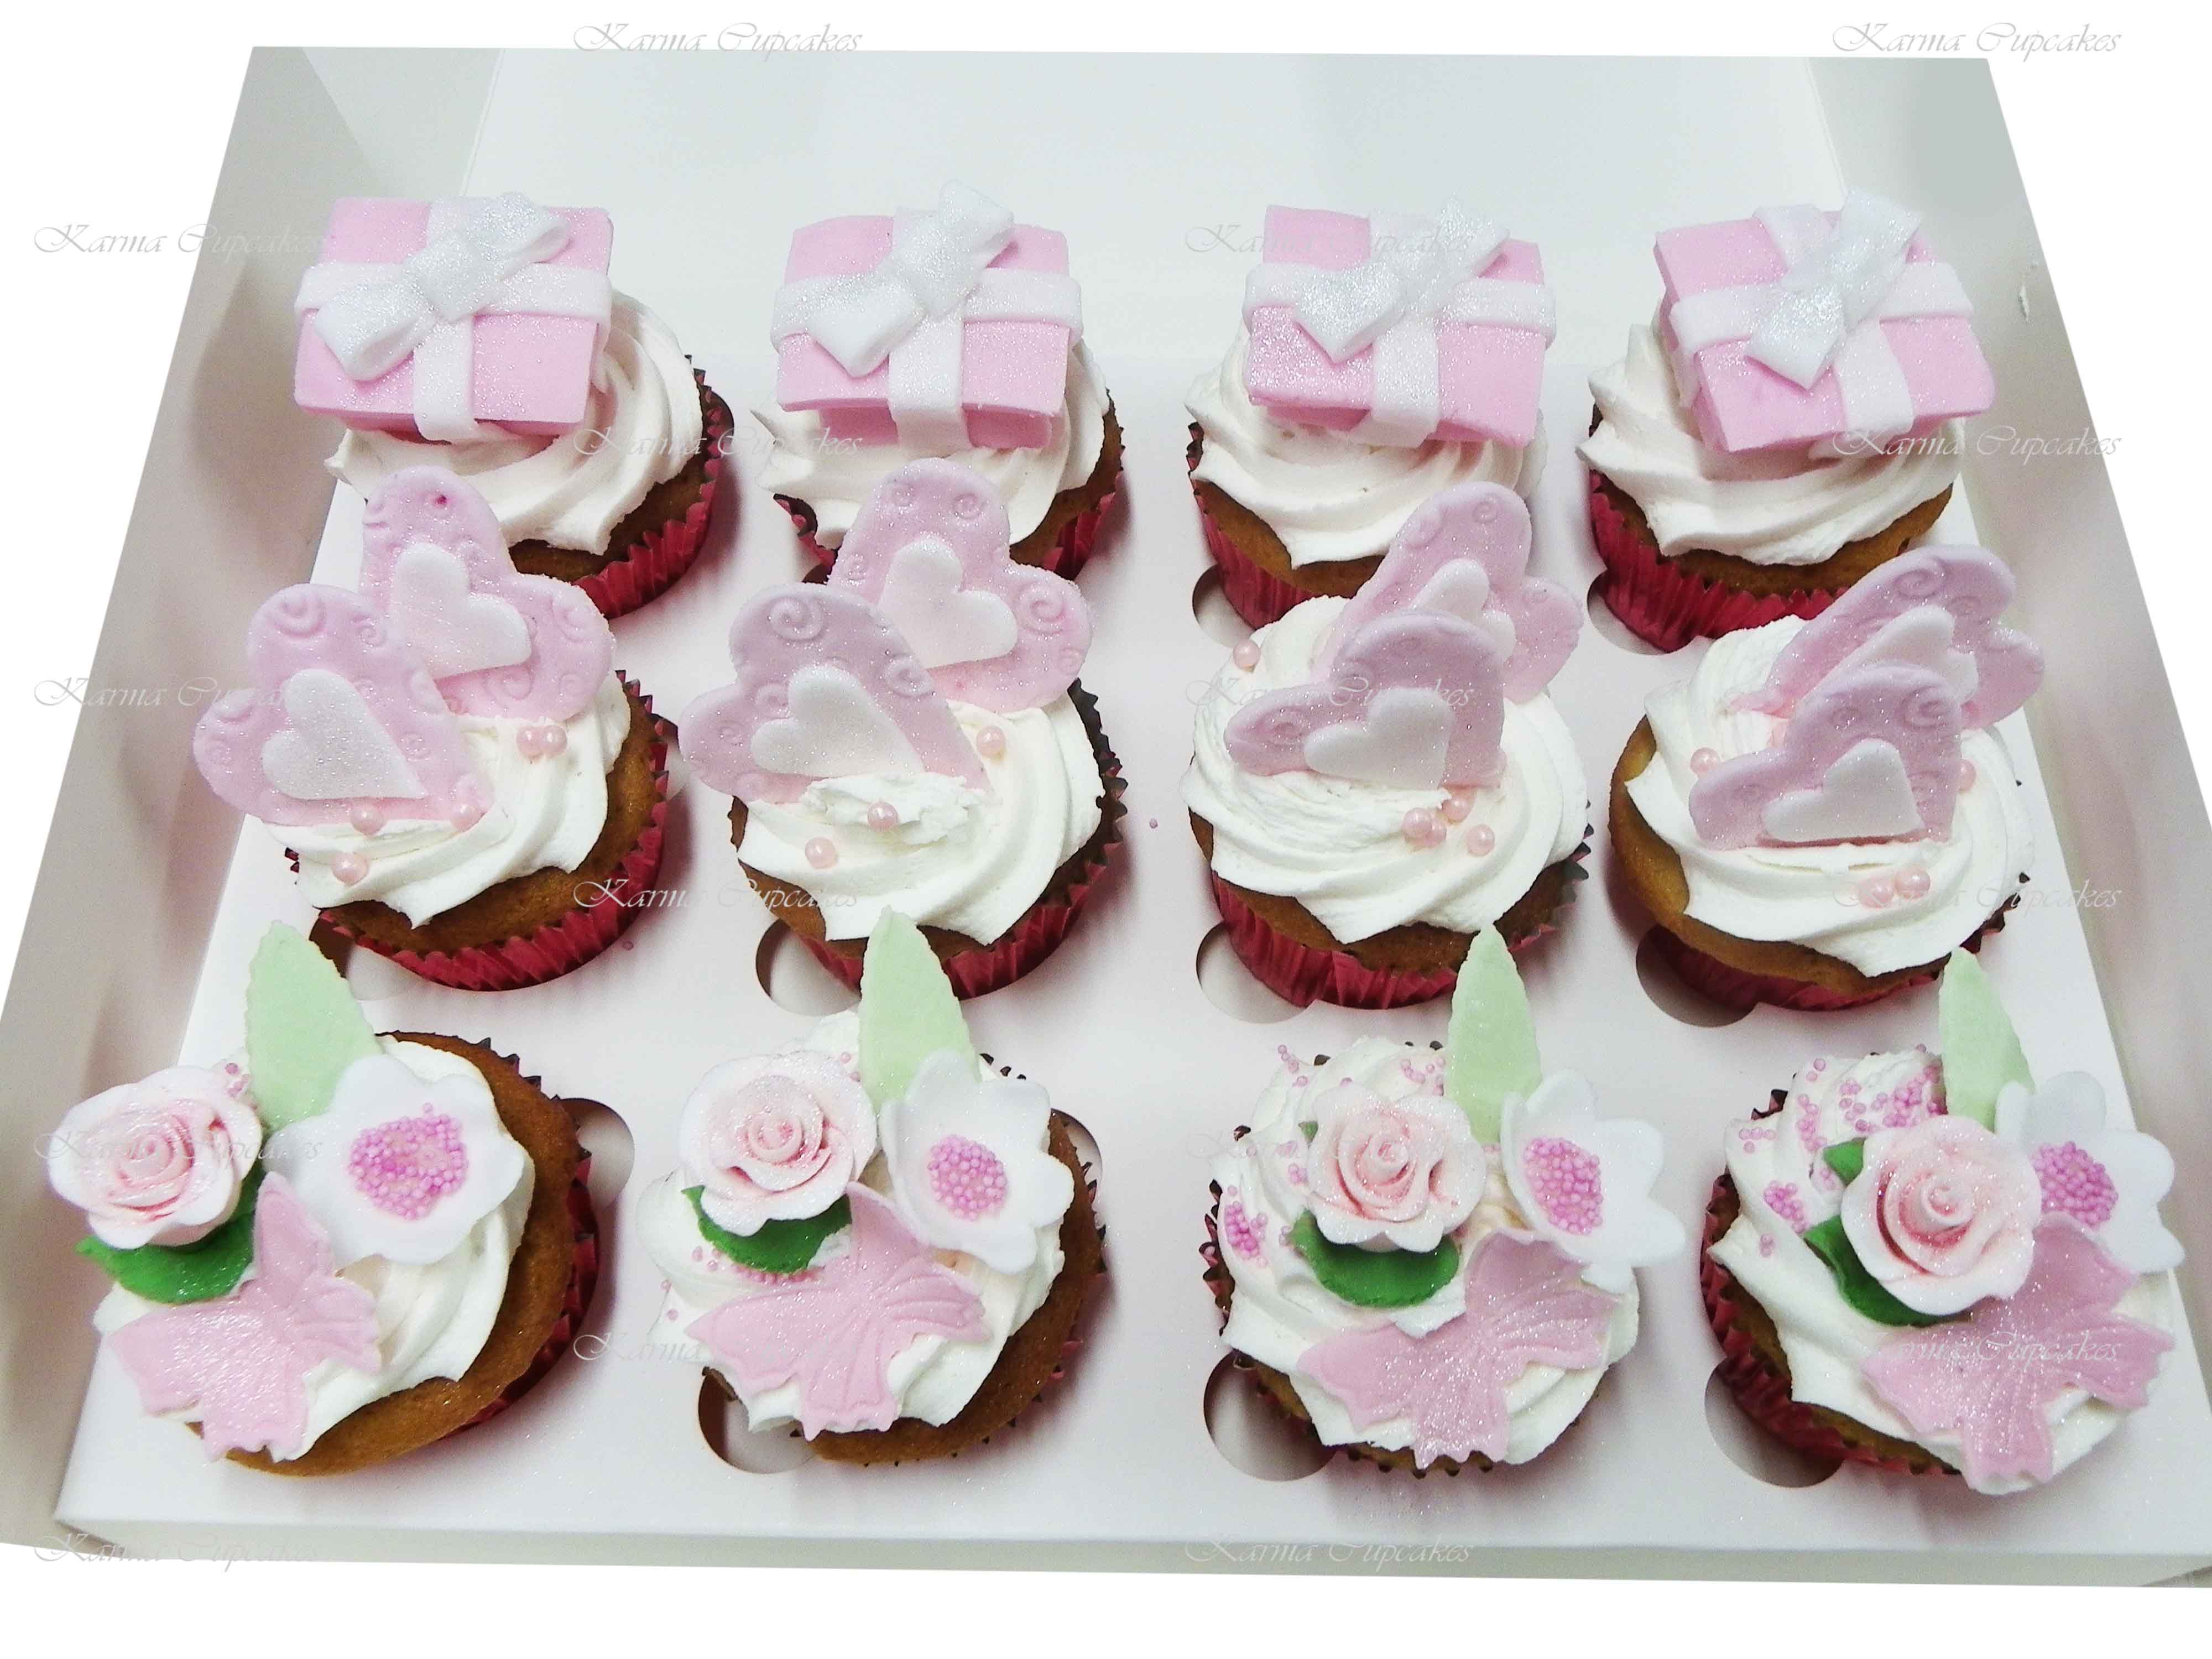 Birthday Cupcakes with Edible Flowers, Hearts and Handmade Presents